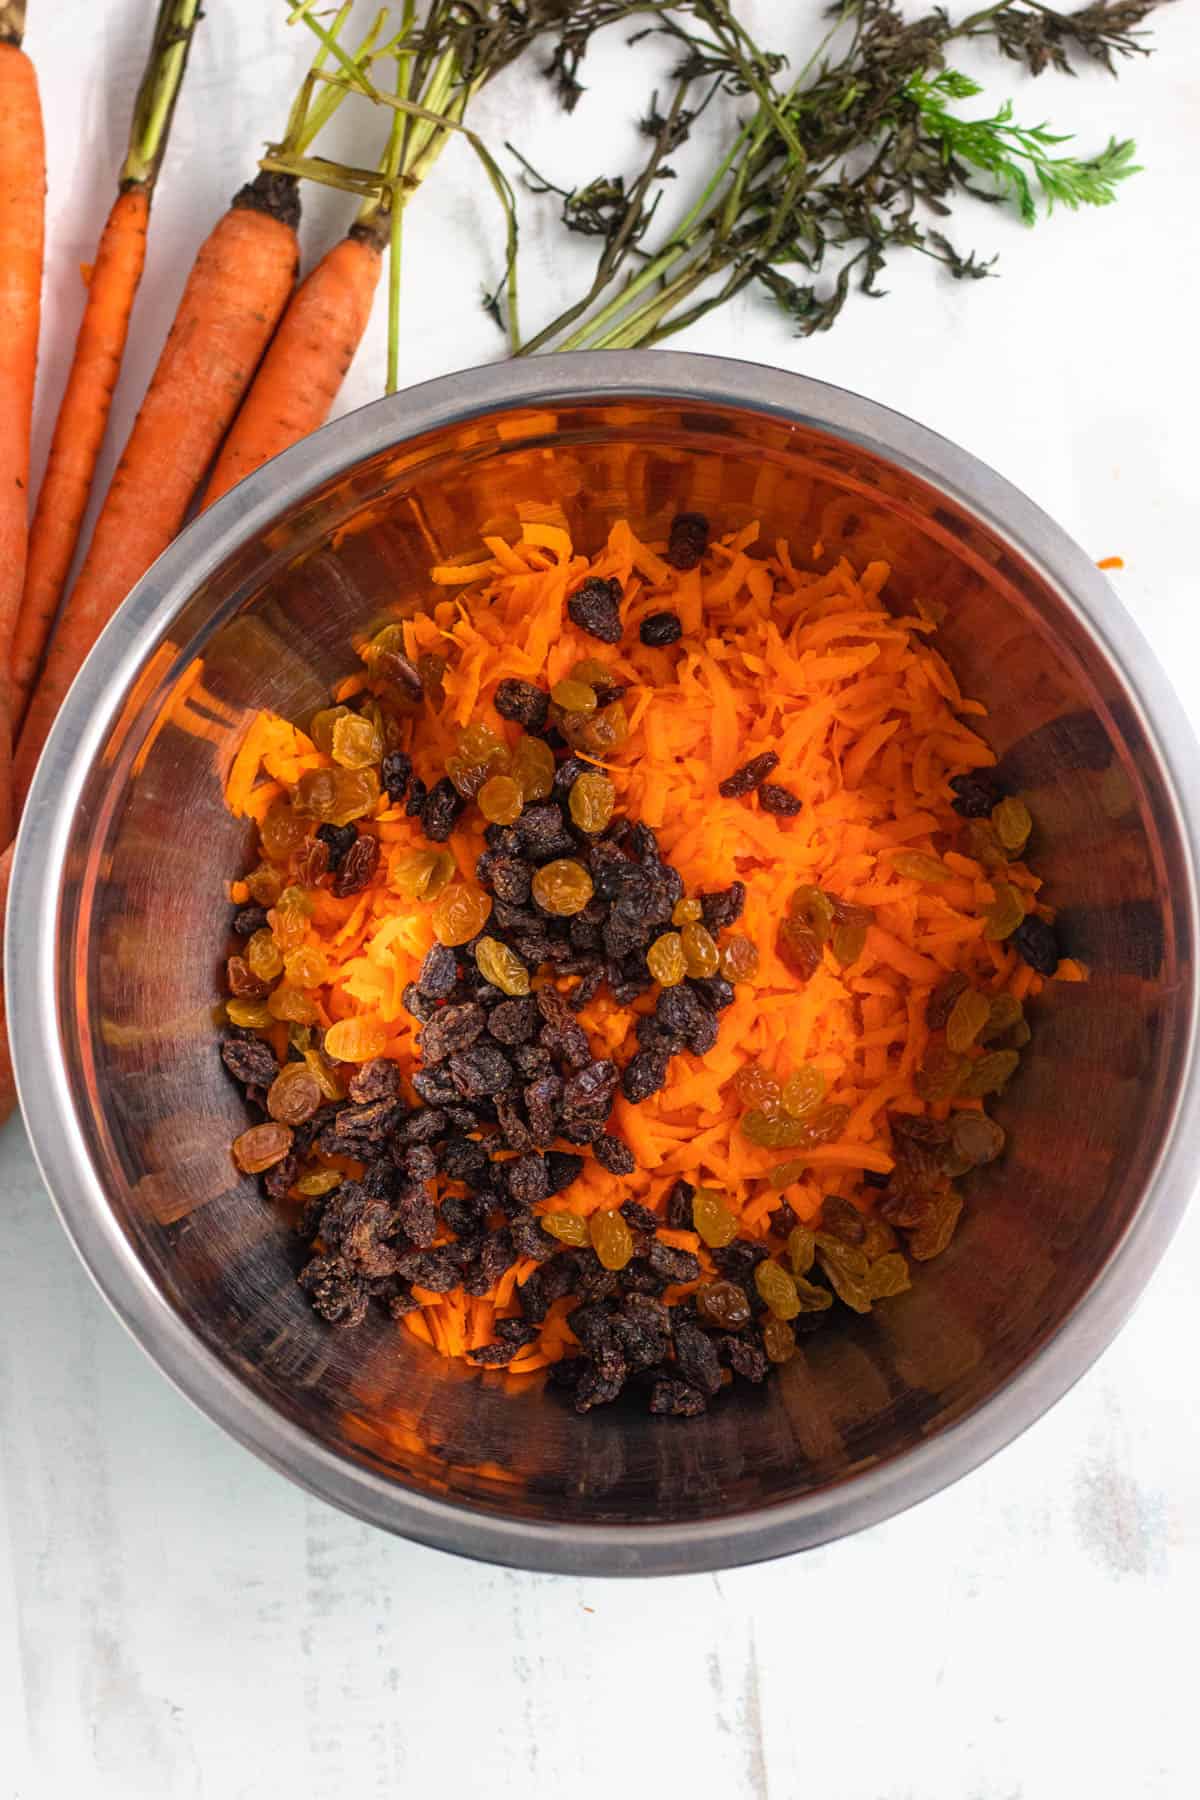 shredded carrots with raisins and golden raisins in a bowl with a light colored background 